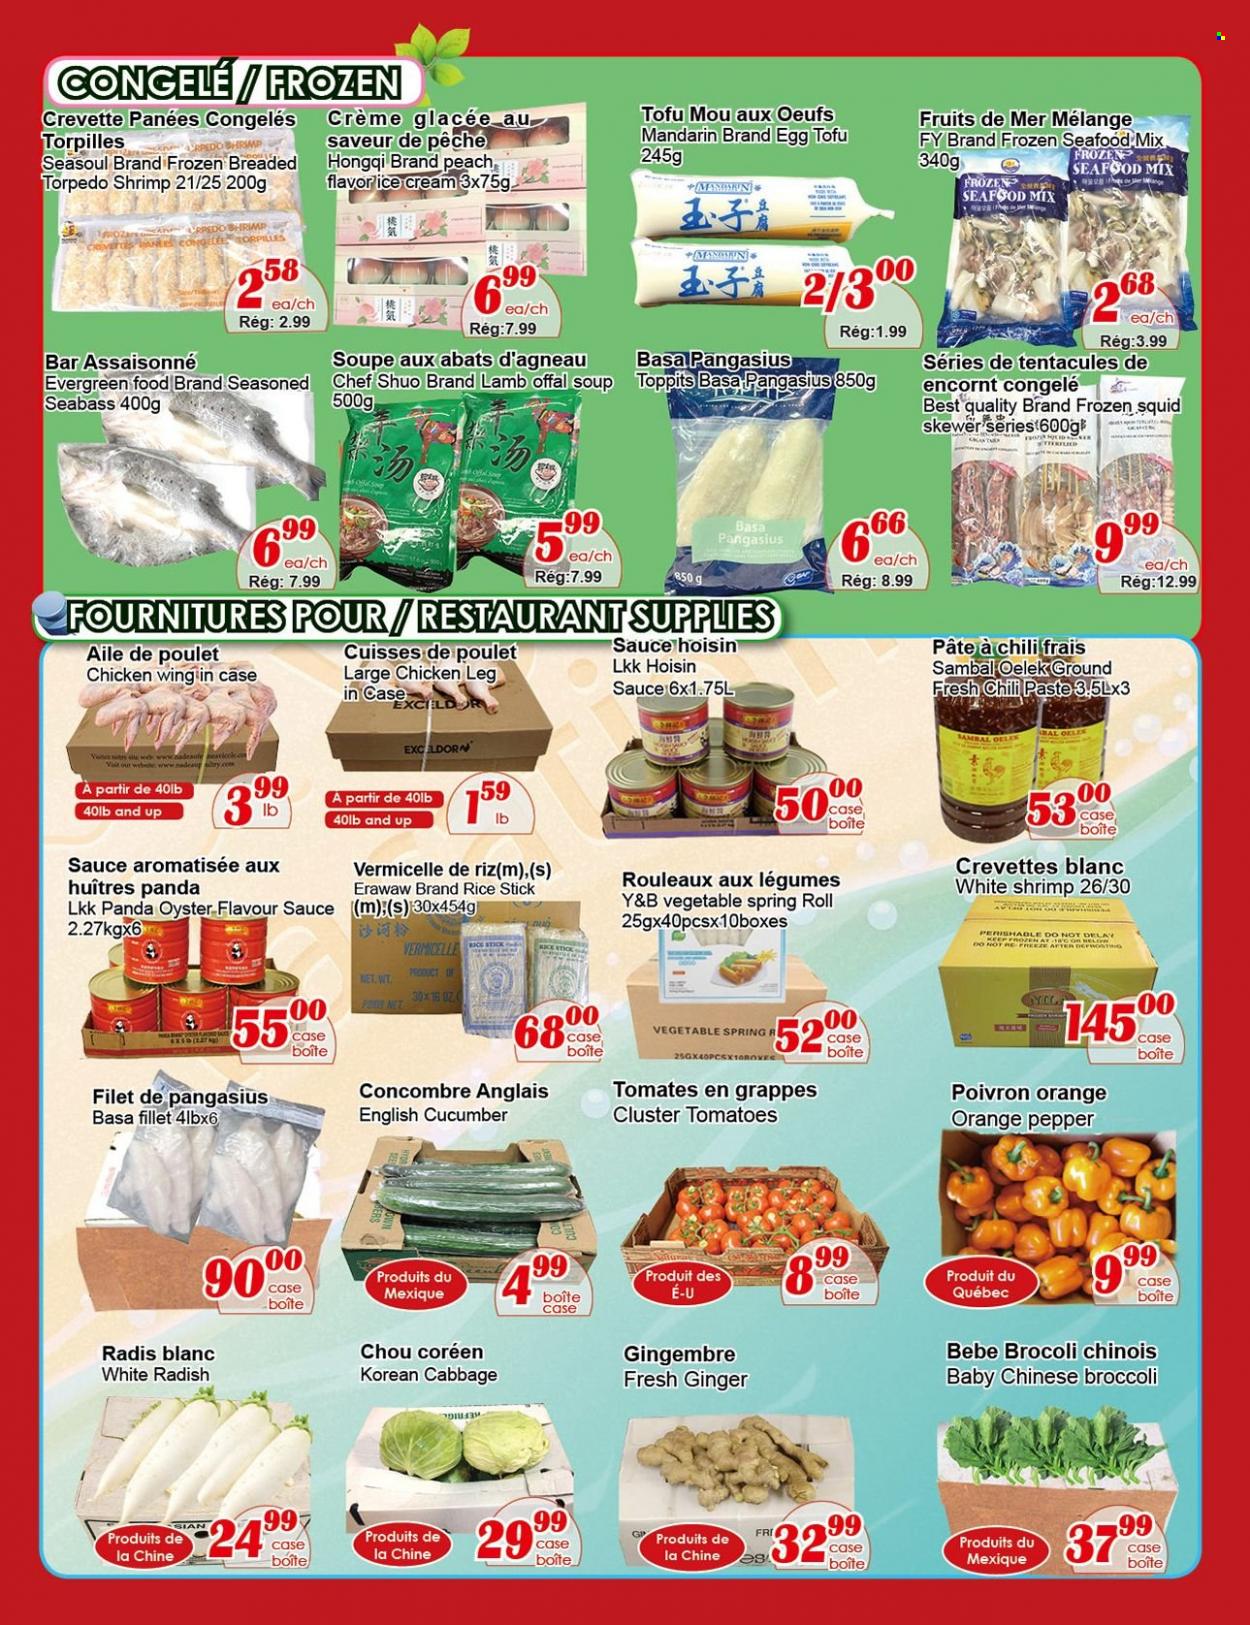 Marché C&T flyer  - May 12, 2022 - May 18, 2022.